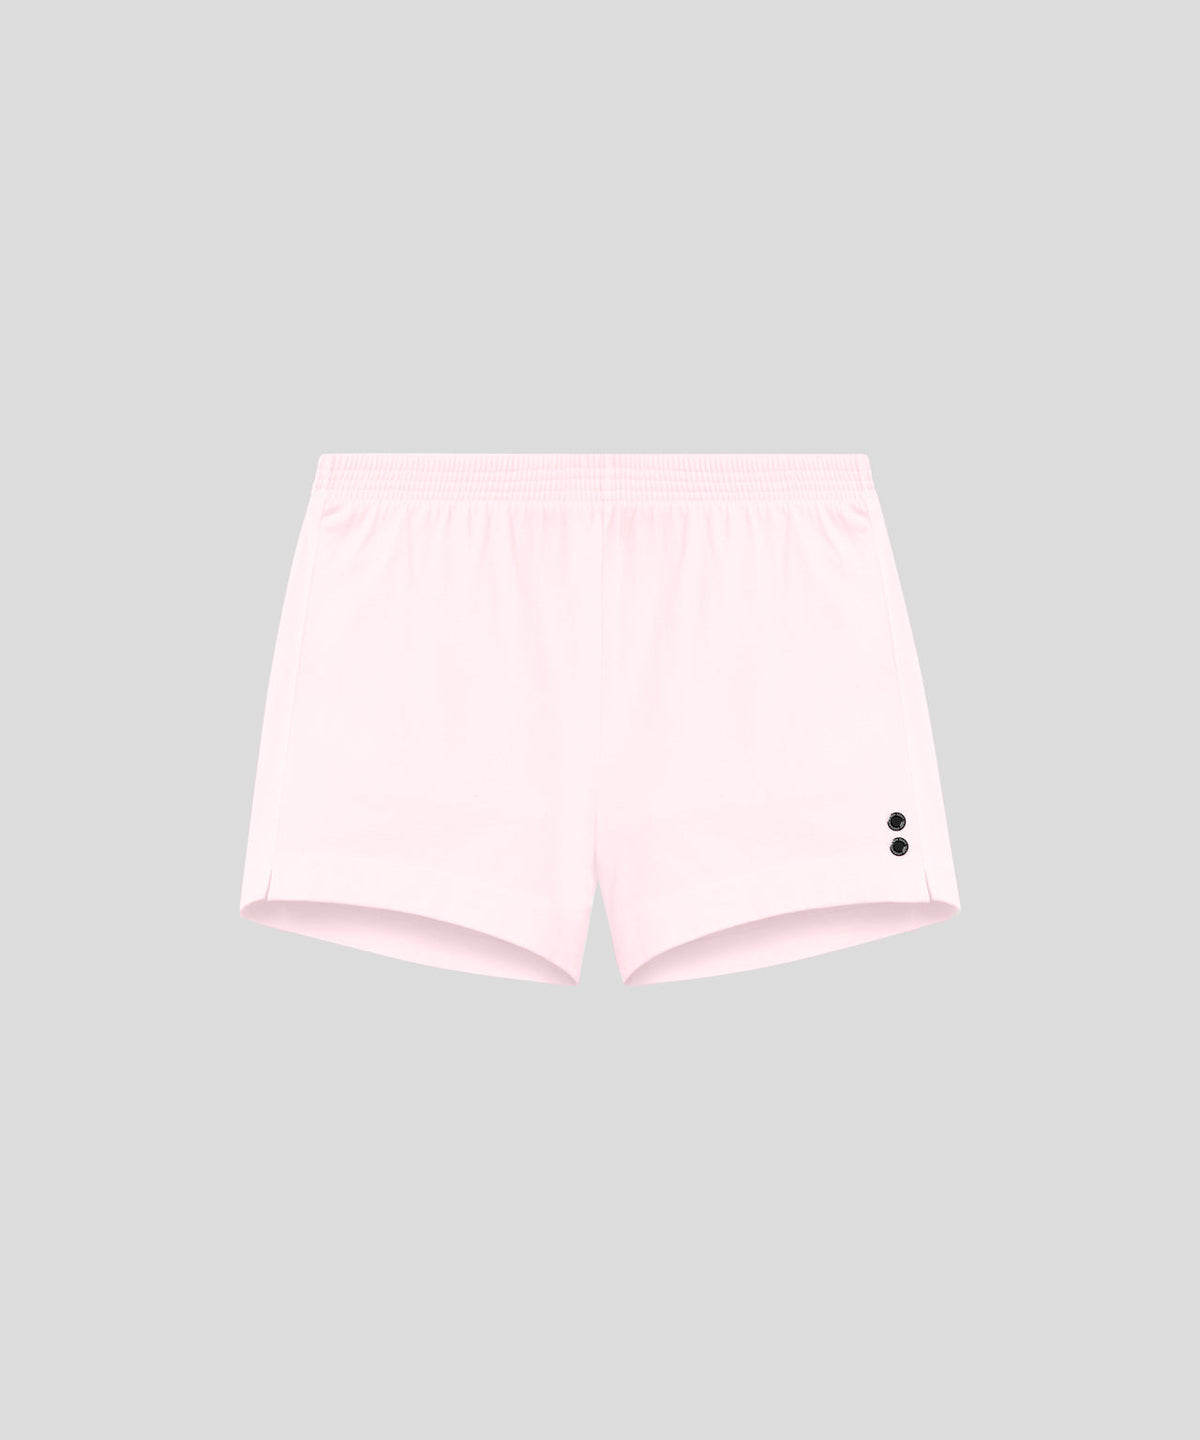 Home Shorts: Dusty Pink